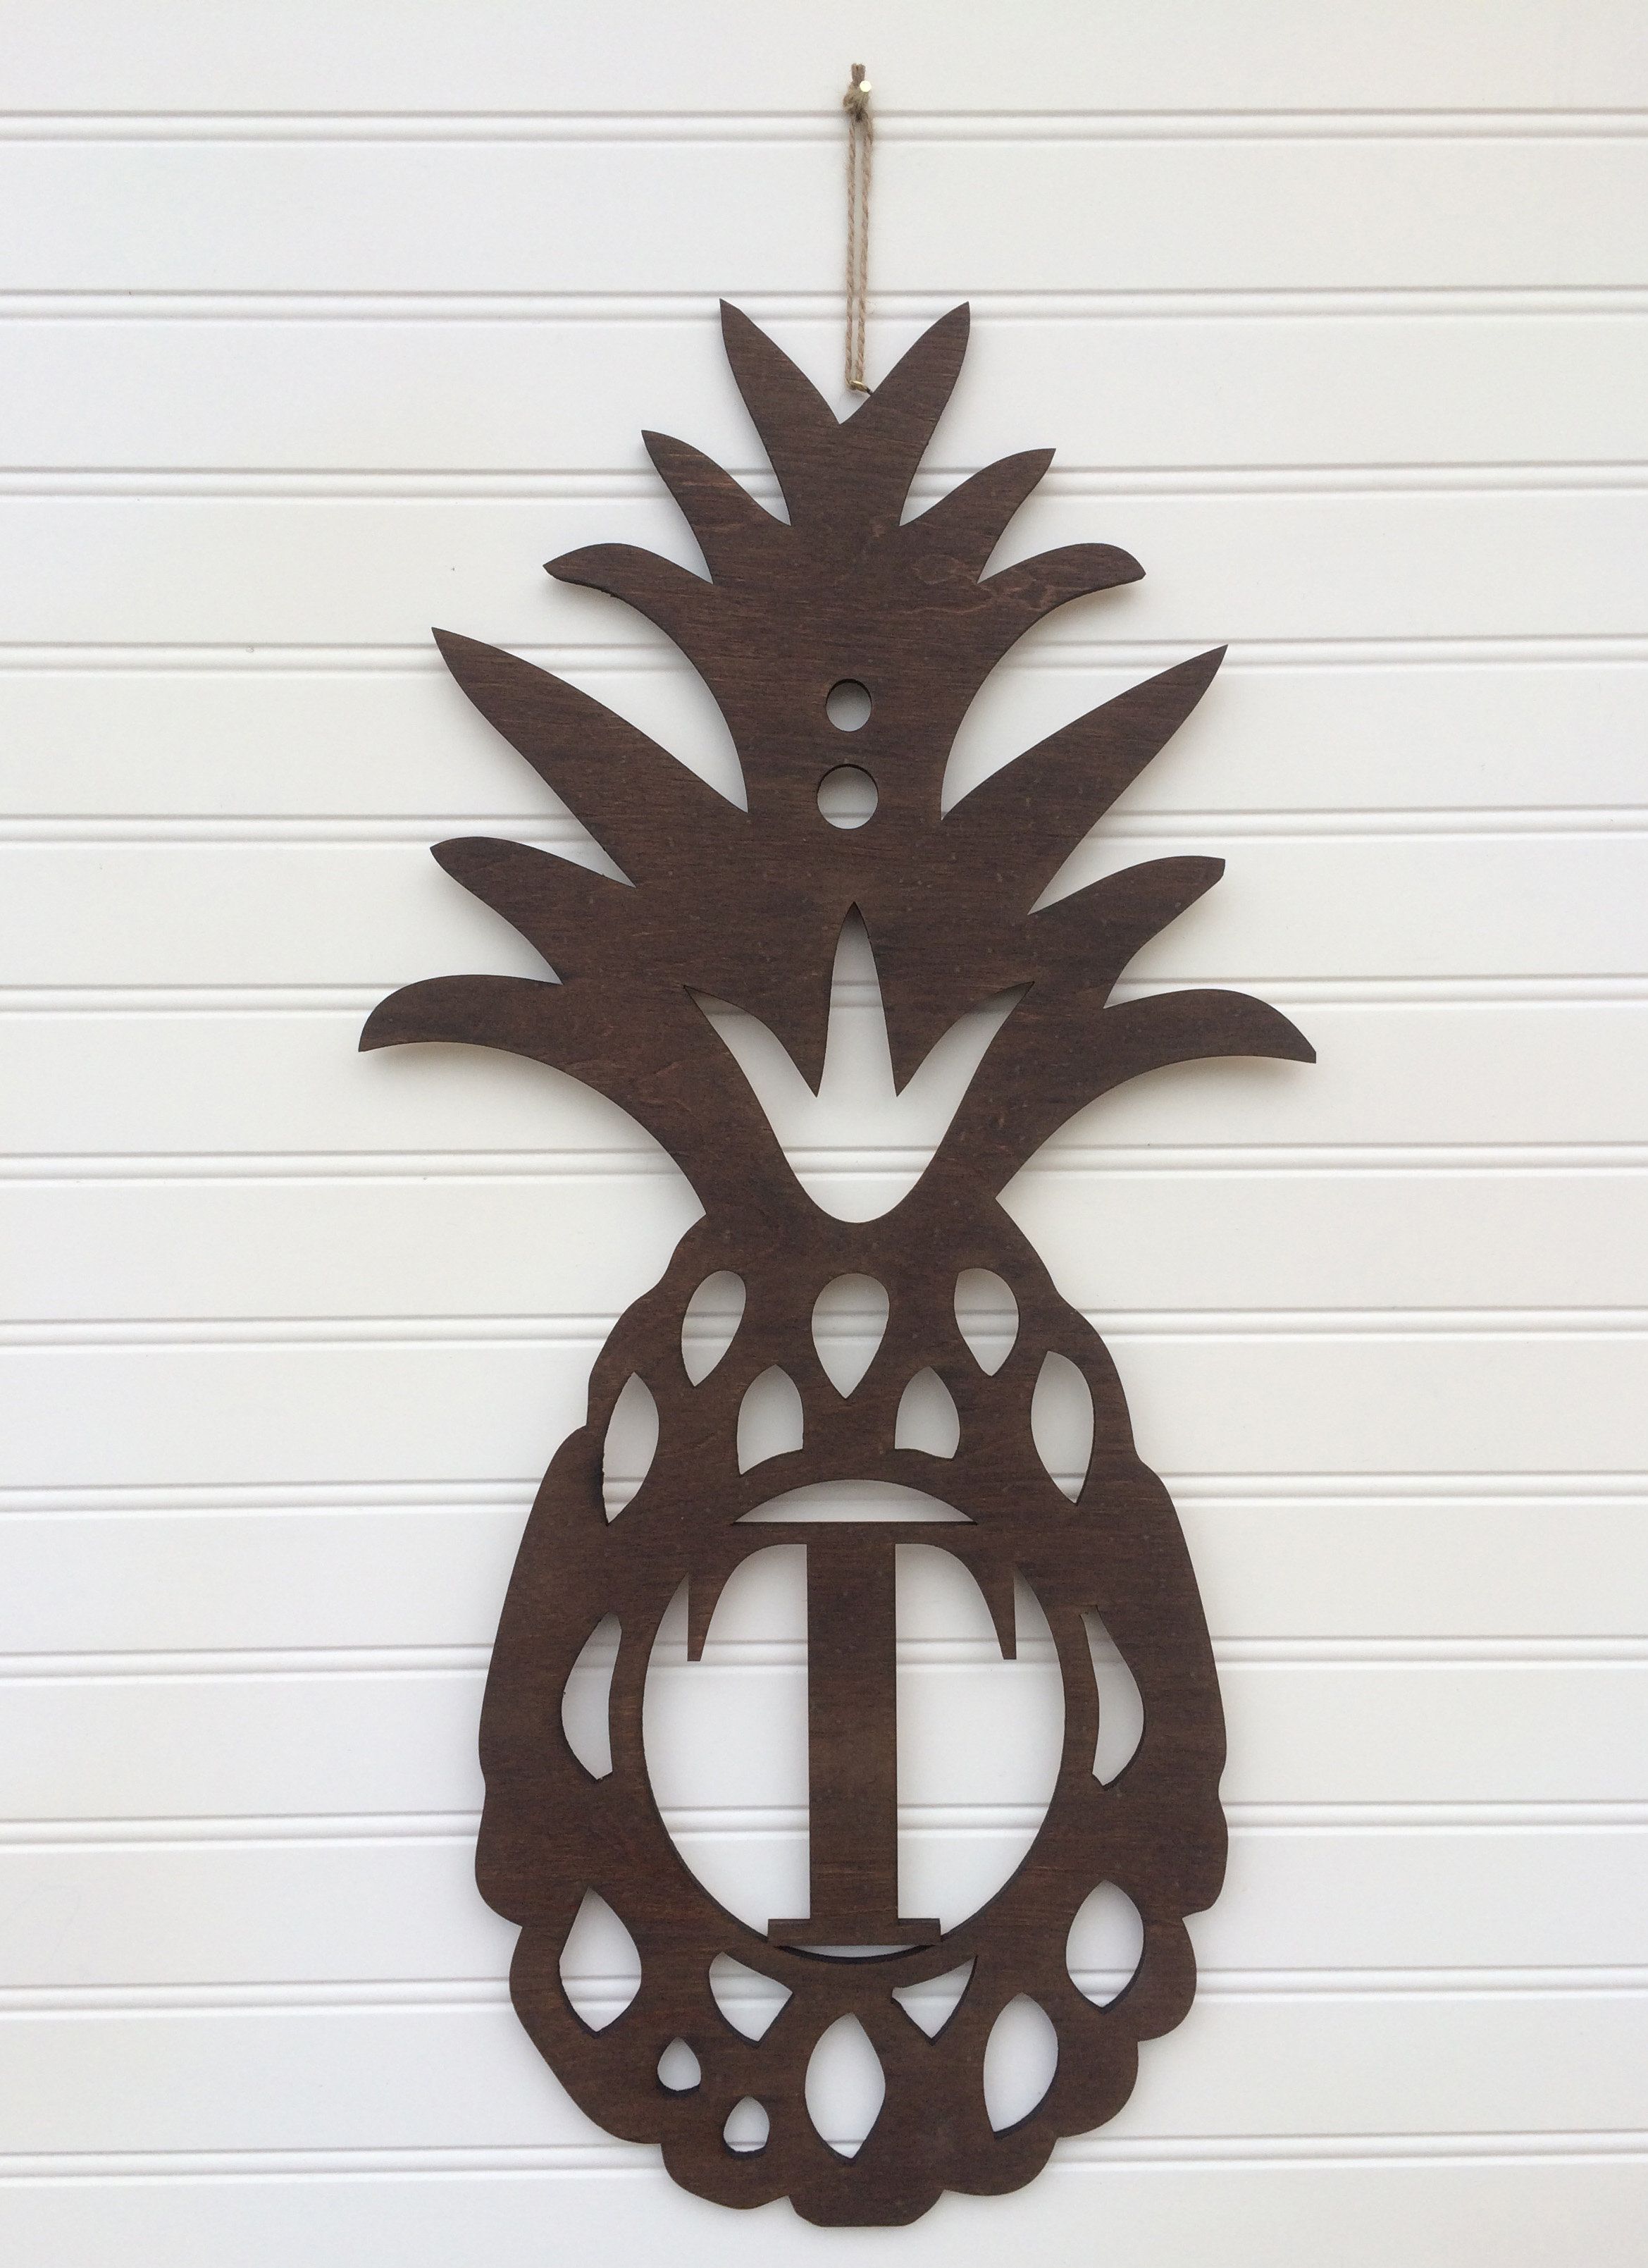 Pineapple Monogrammed Wall Décor With Regard To Pineapple Wall Decor (View 27 of 30)